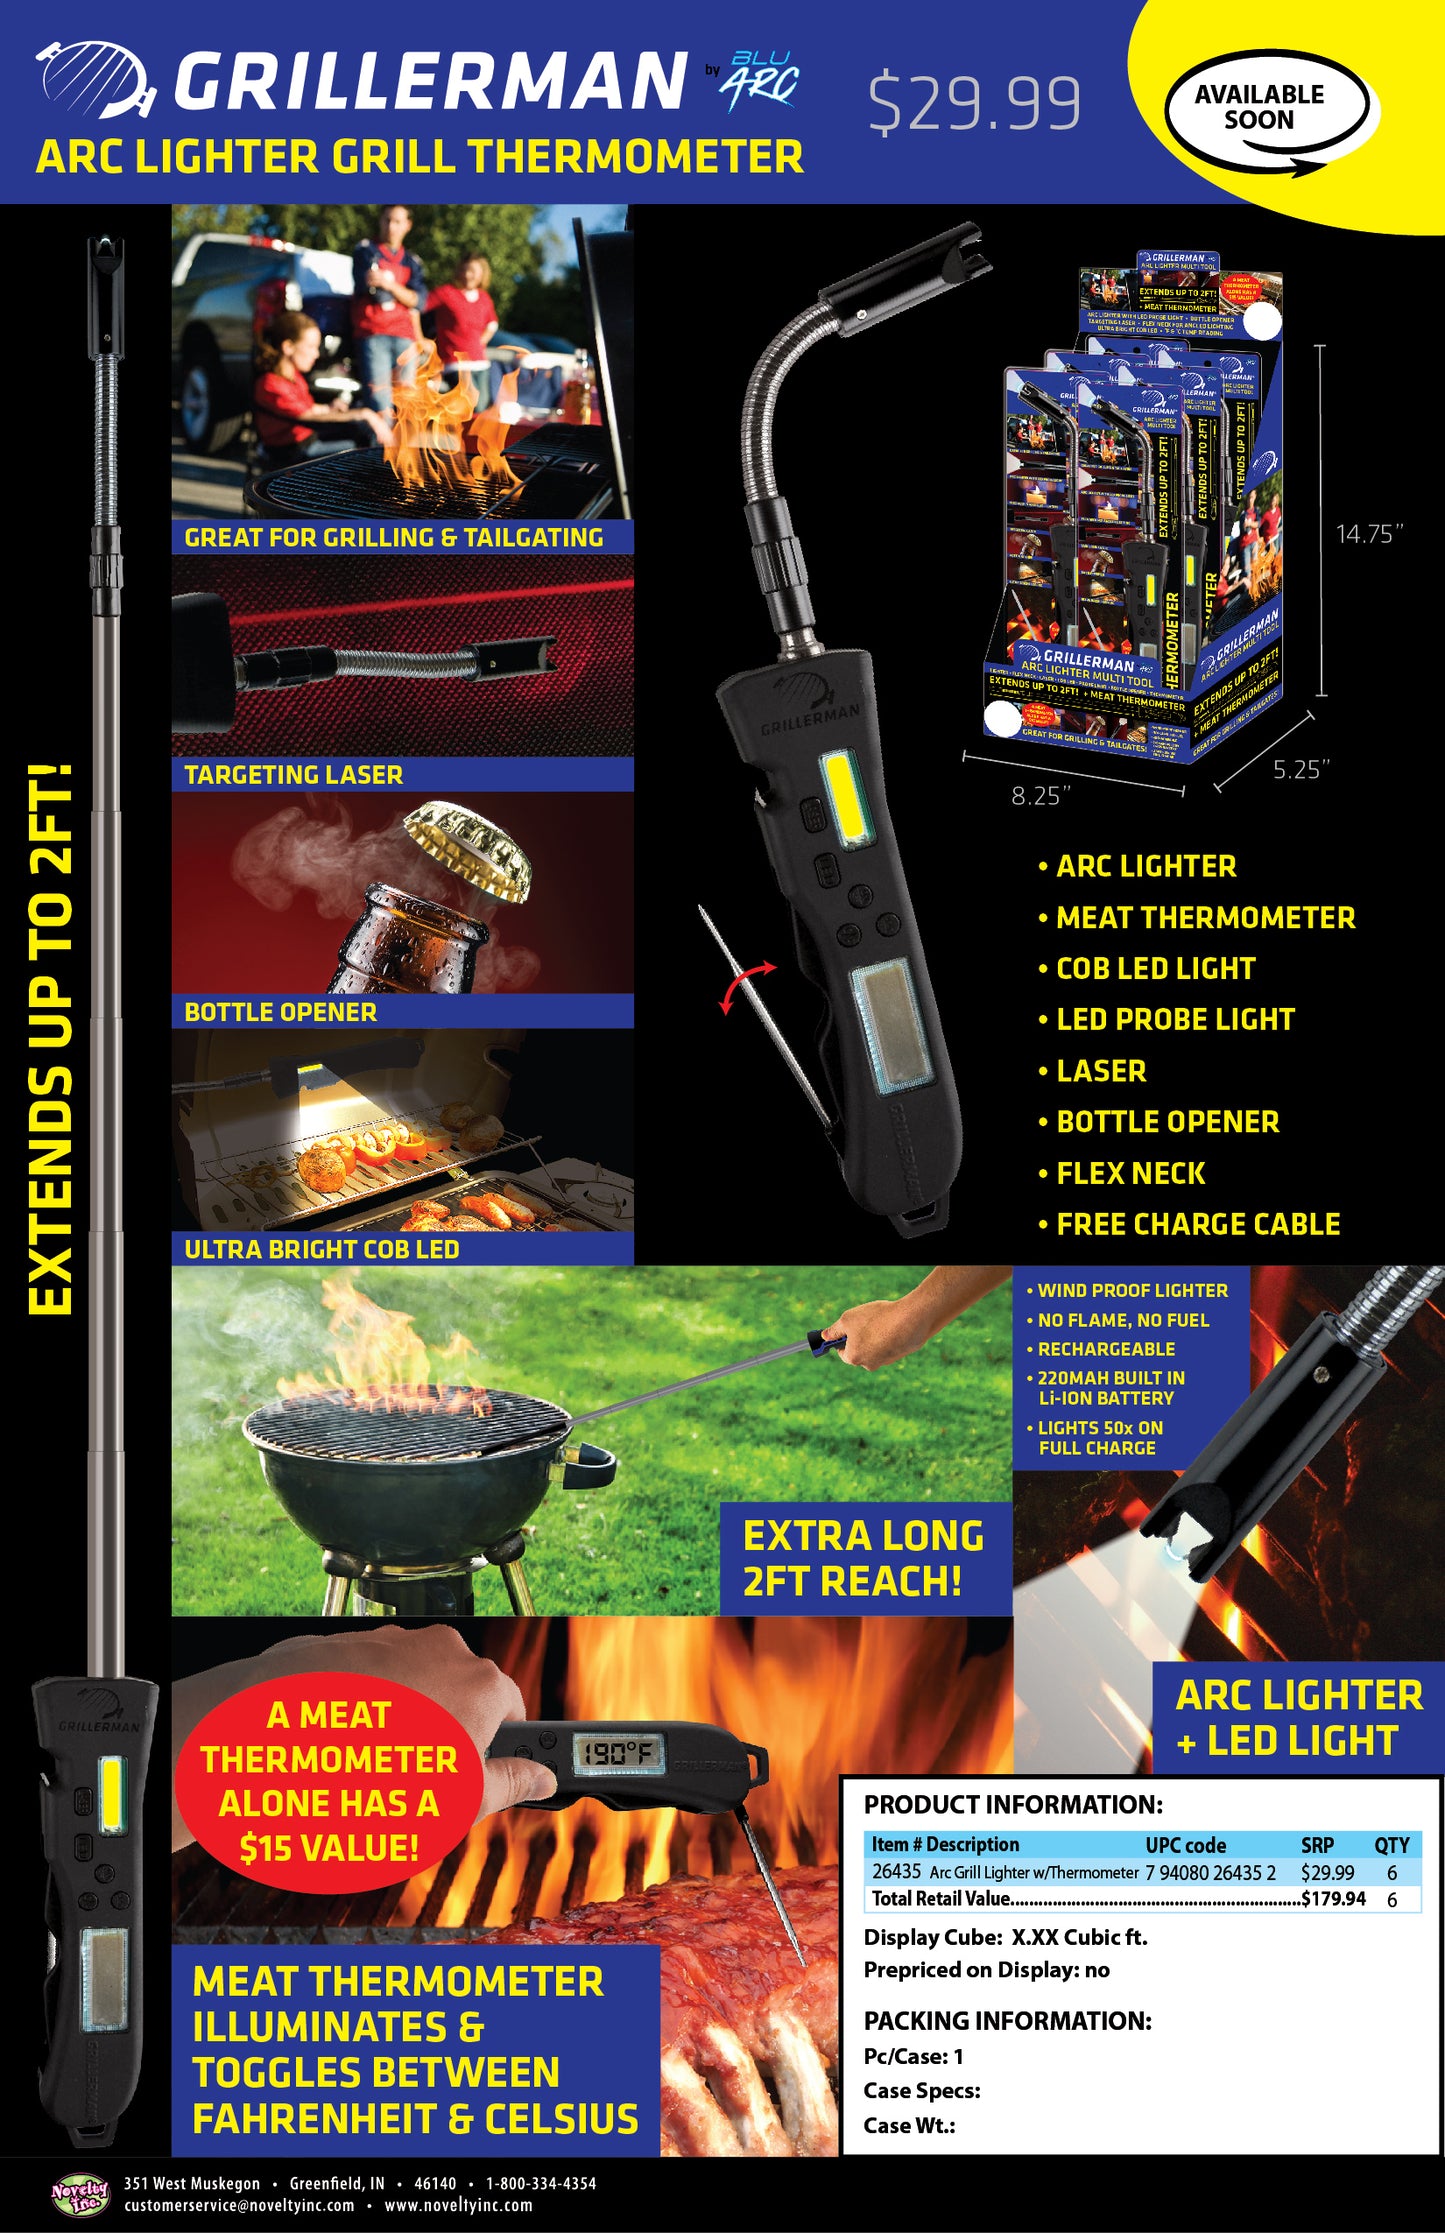 ITEM NUMBER 026435 ARC GRILL LIGHTER WITH THERMOMETER 6 PIECES PER DISPLAY